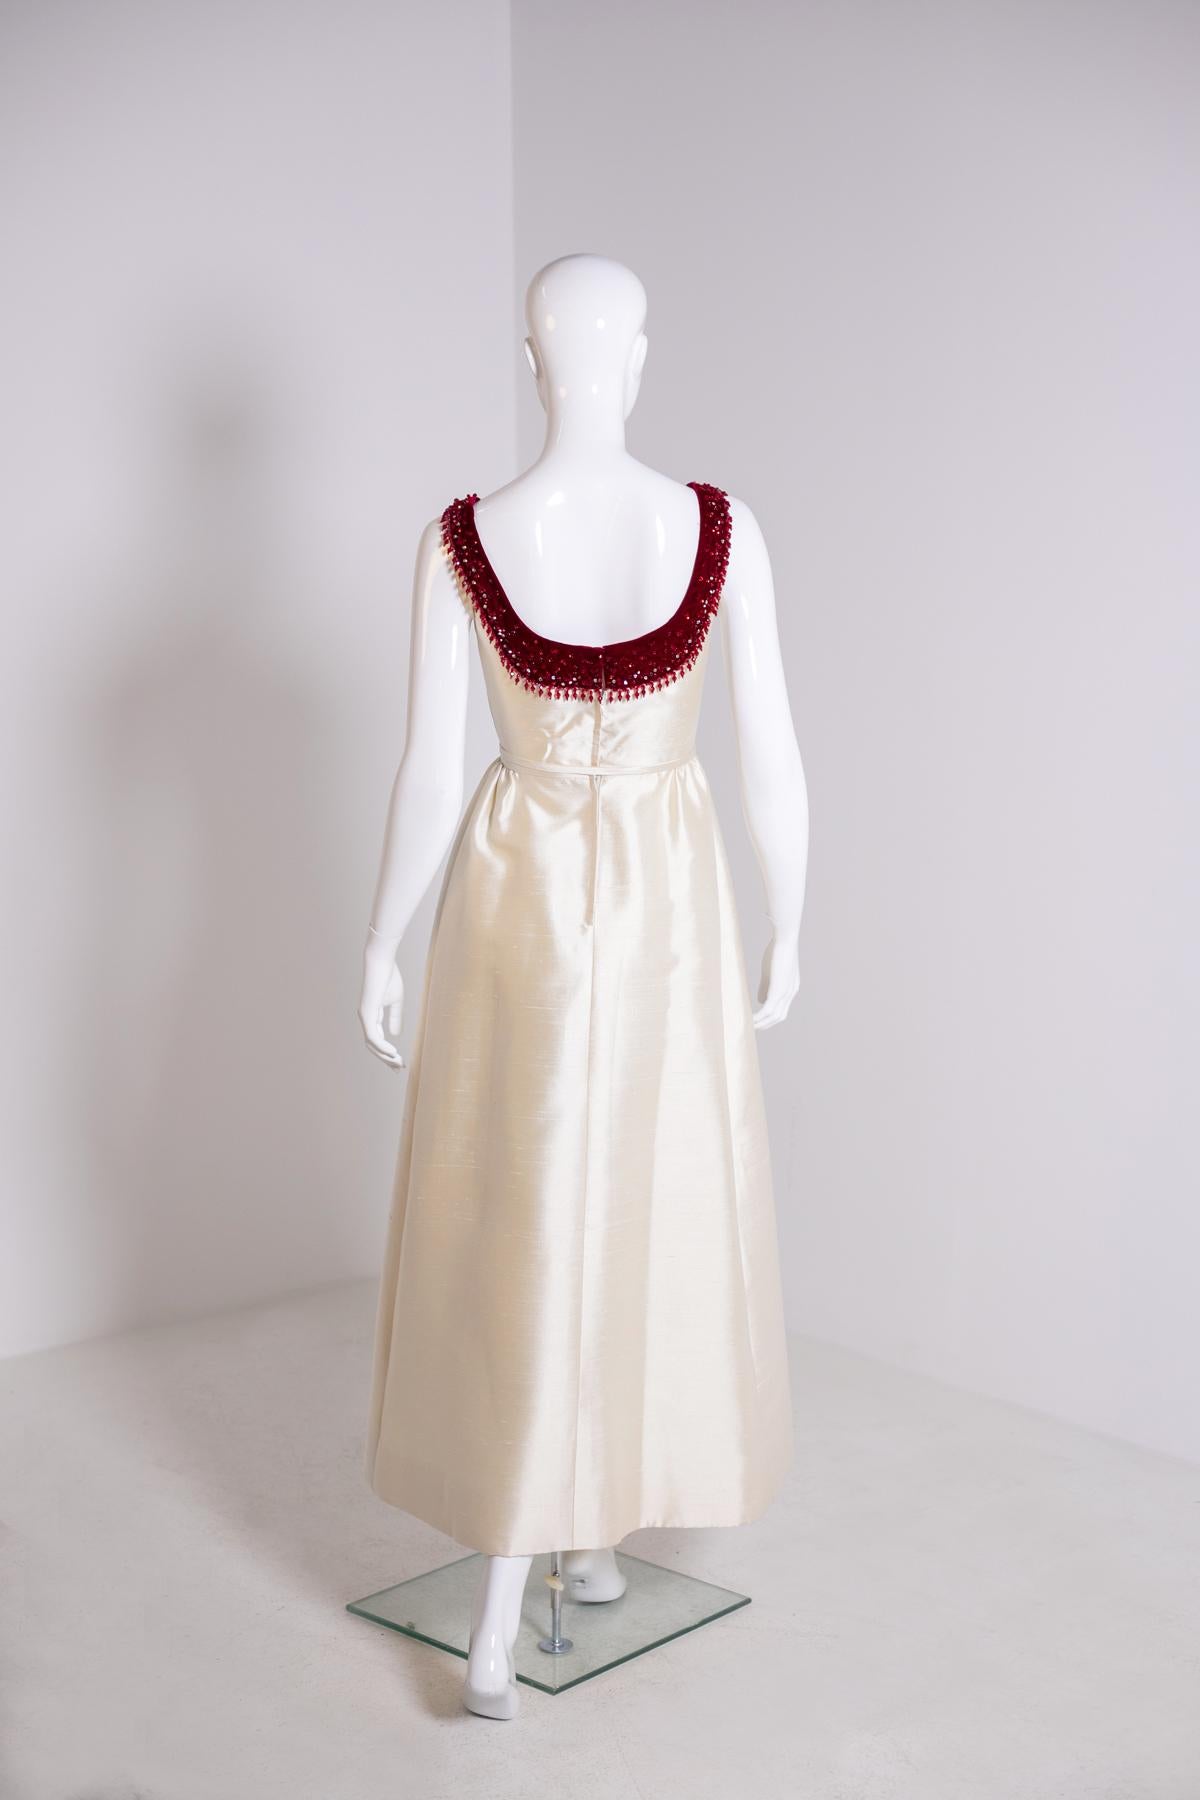 Luxurious Vintage Gala Dress in Silk and Red Jewels 11